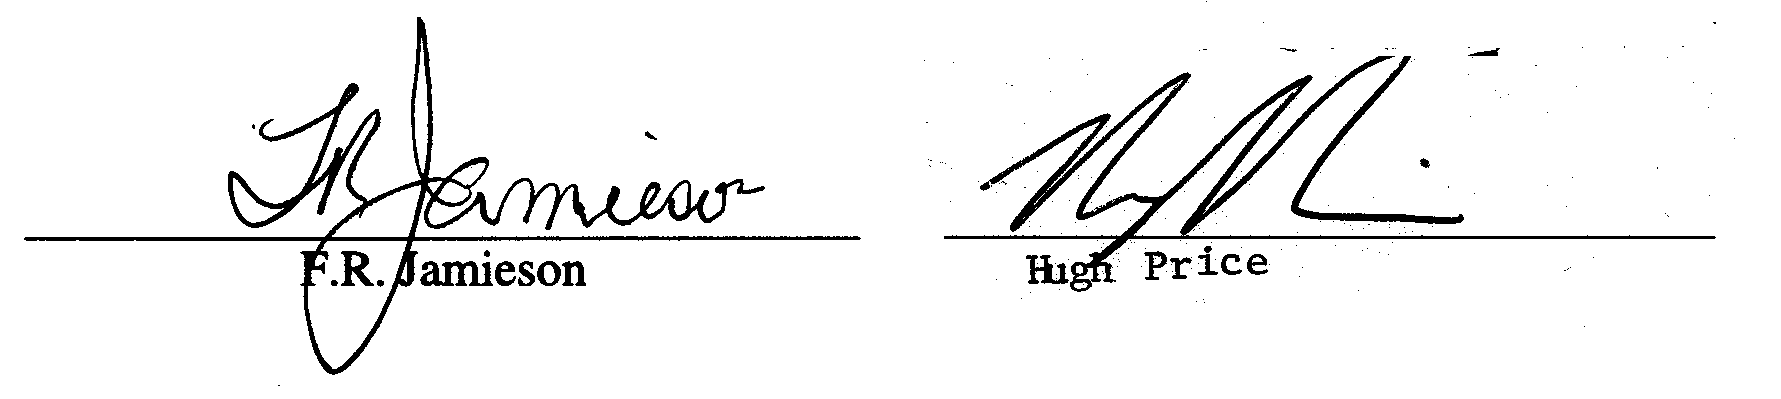 Signature for Letter of Understanding